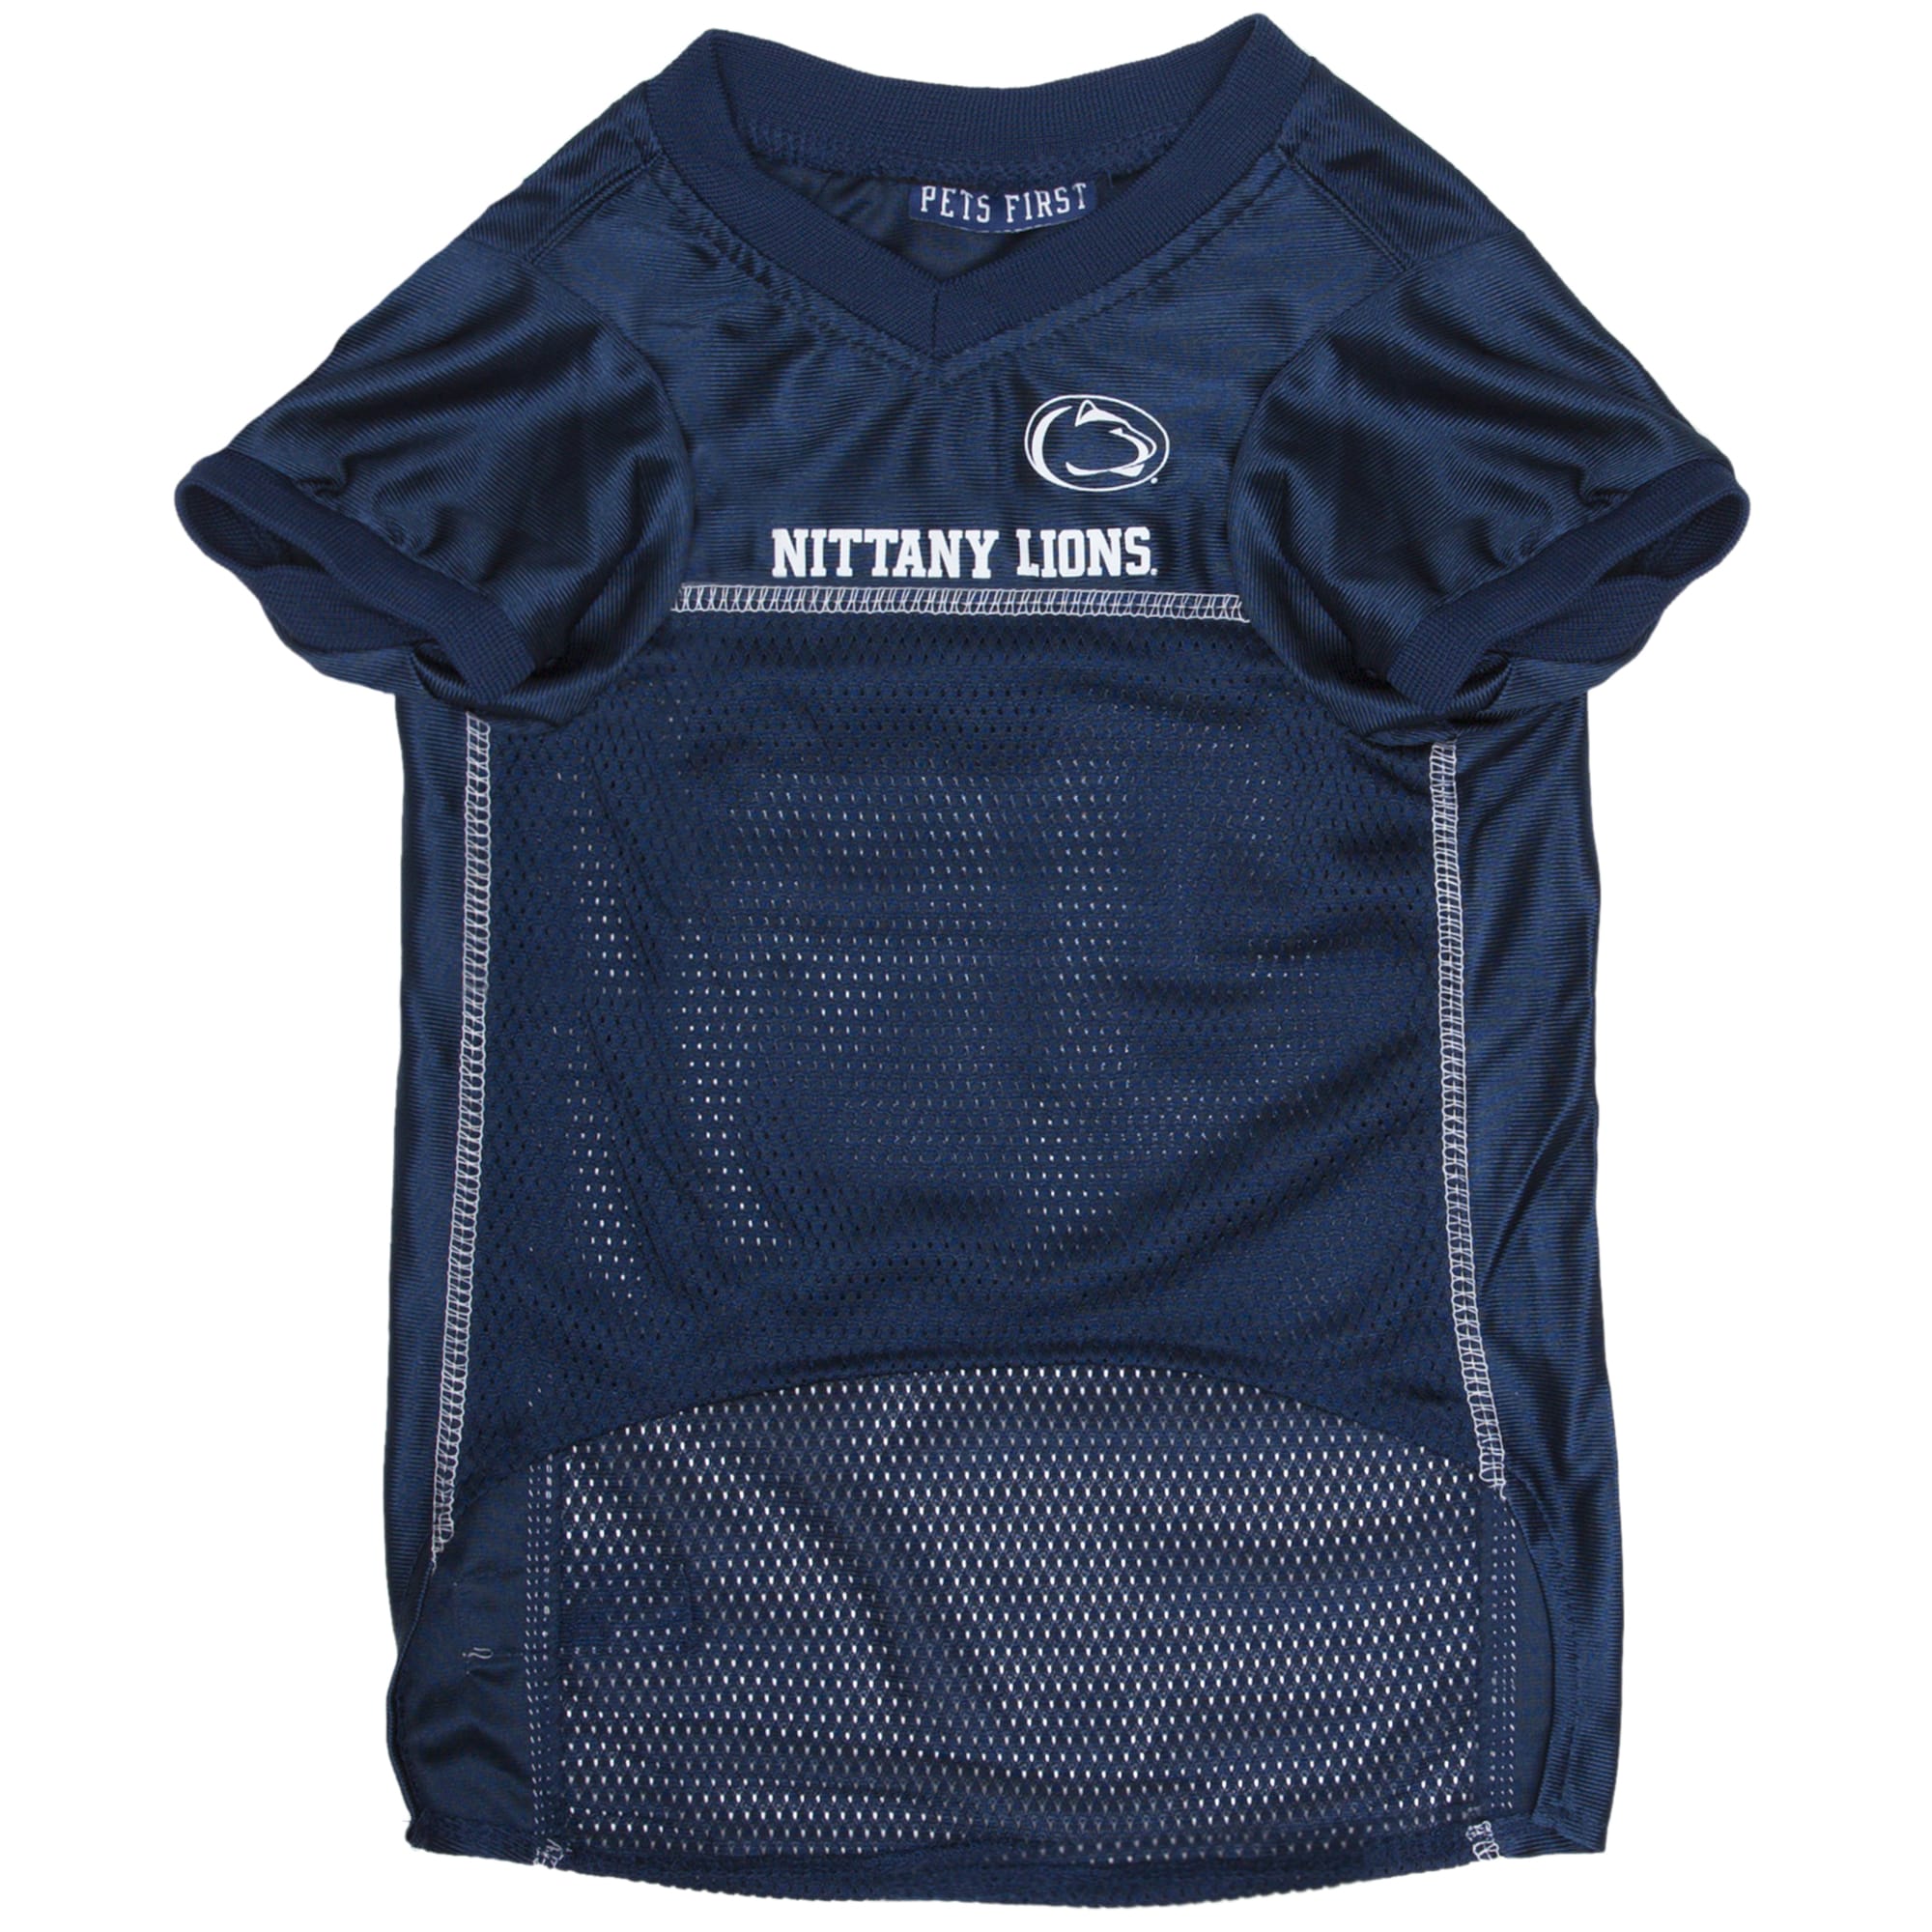 Big Dog Littlearth unisex-adult NCAA Penn State Nittany Lions Stretch Pet Jersey for Large Dogs Team Color 